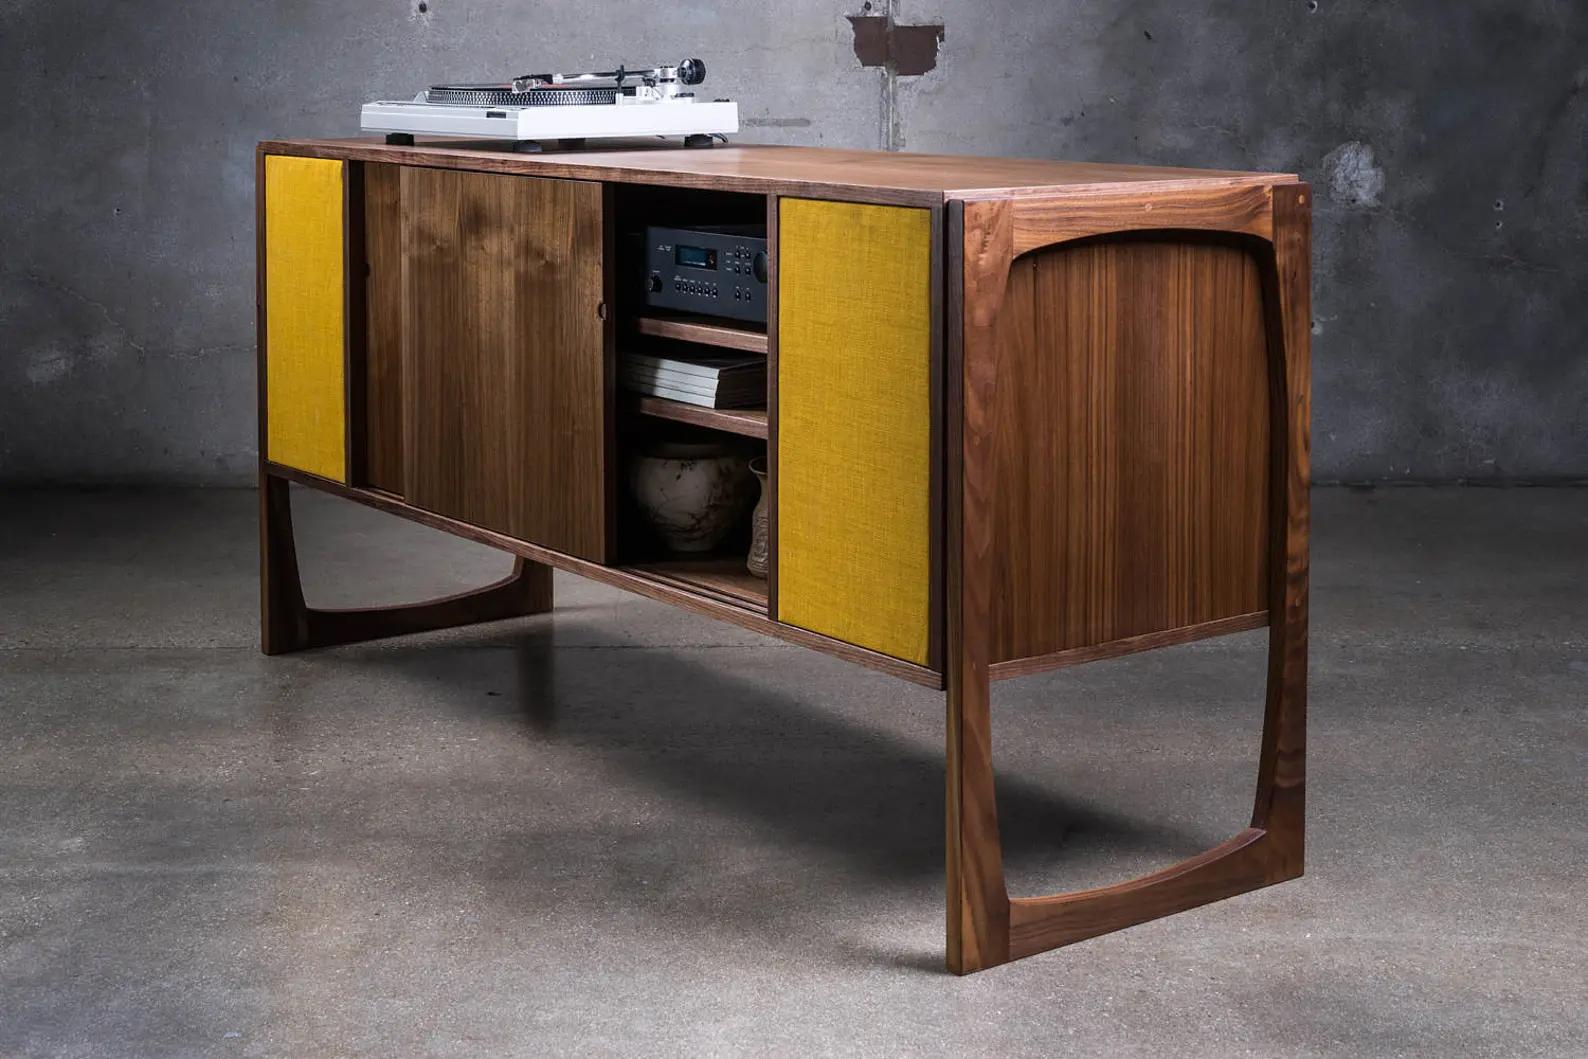 The Douglas Stereo Cabinet has been meticulously designed to be the perfect home for stereo components, records, and any other entertainment device/media. It's an original design inspired by a love for mid century/Danish modern, simplicity, and